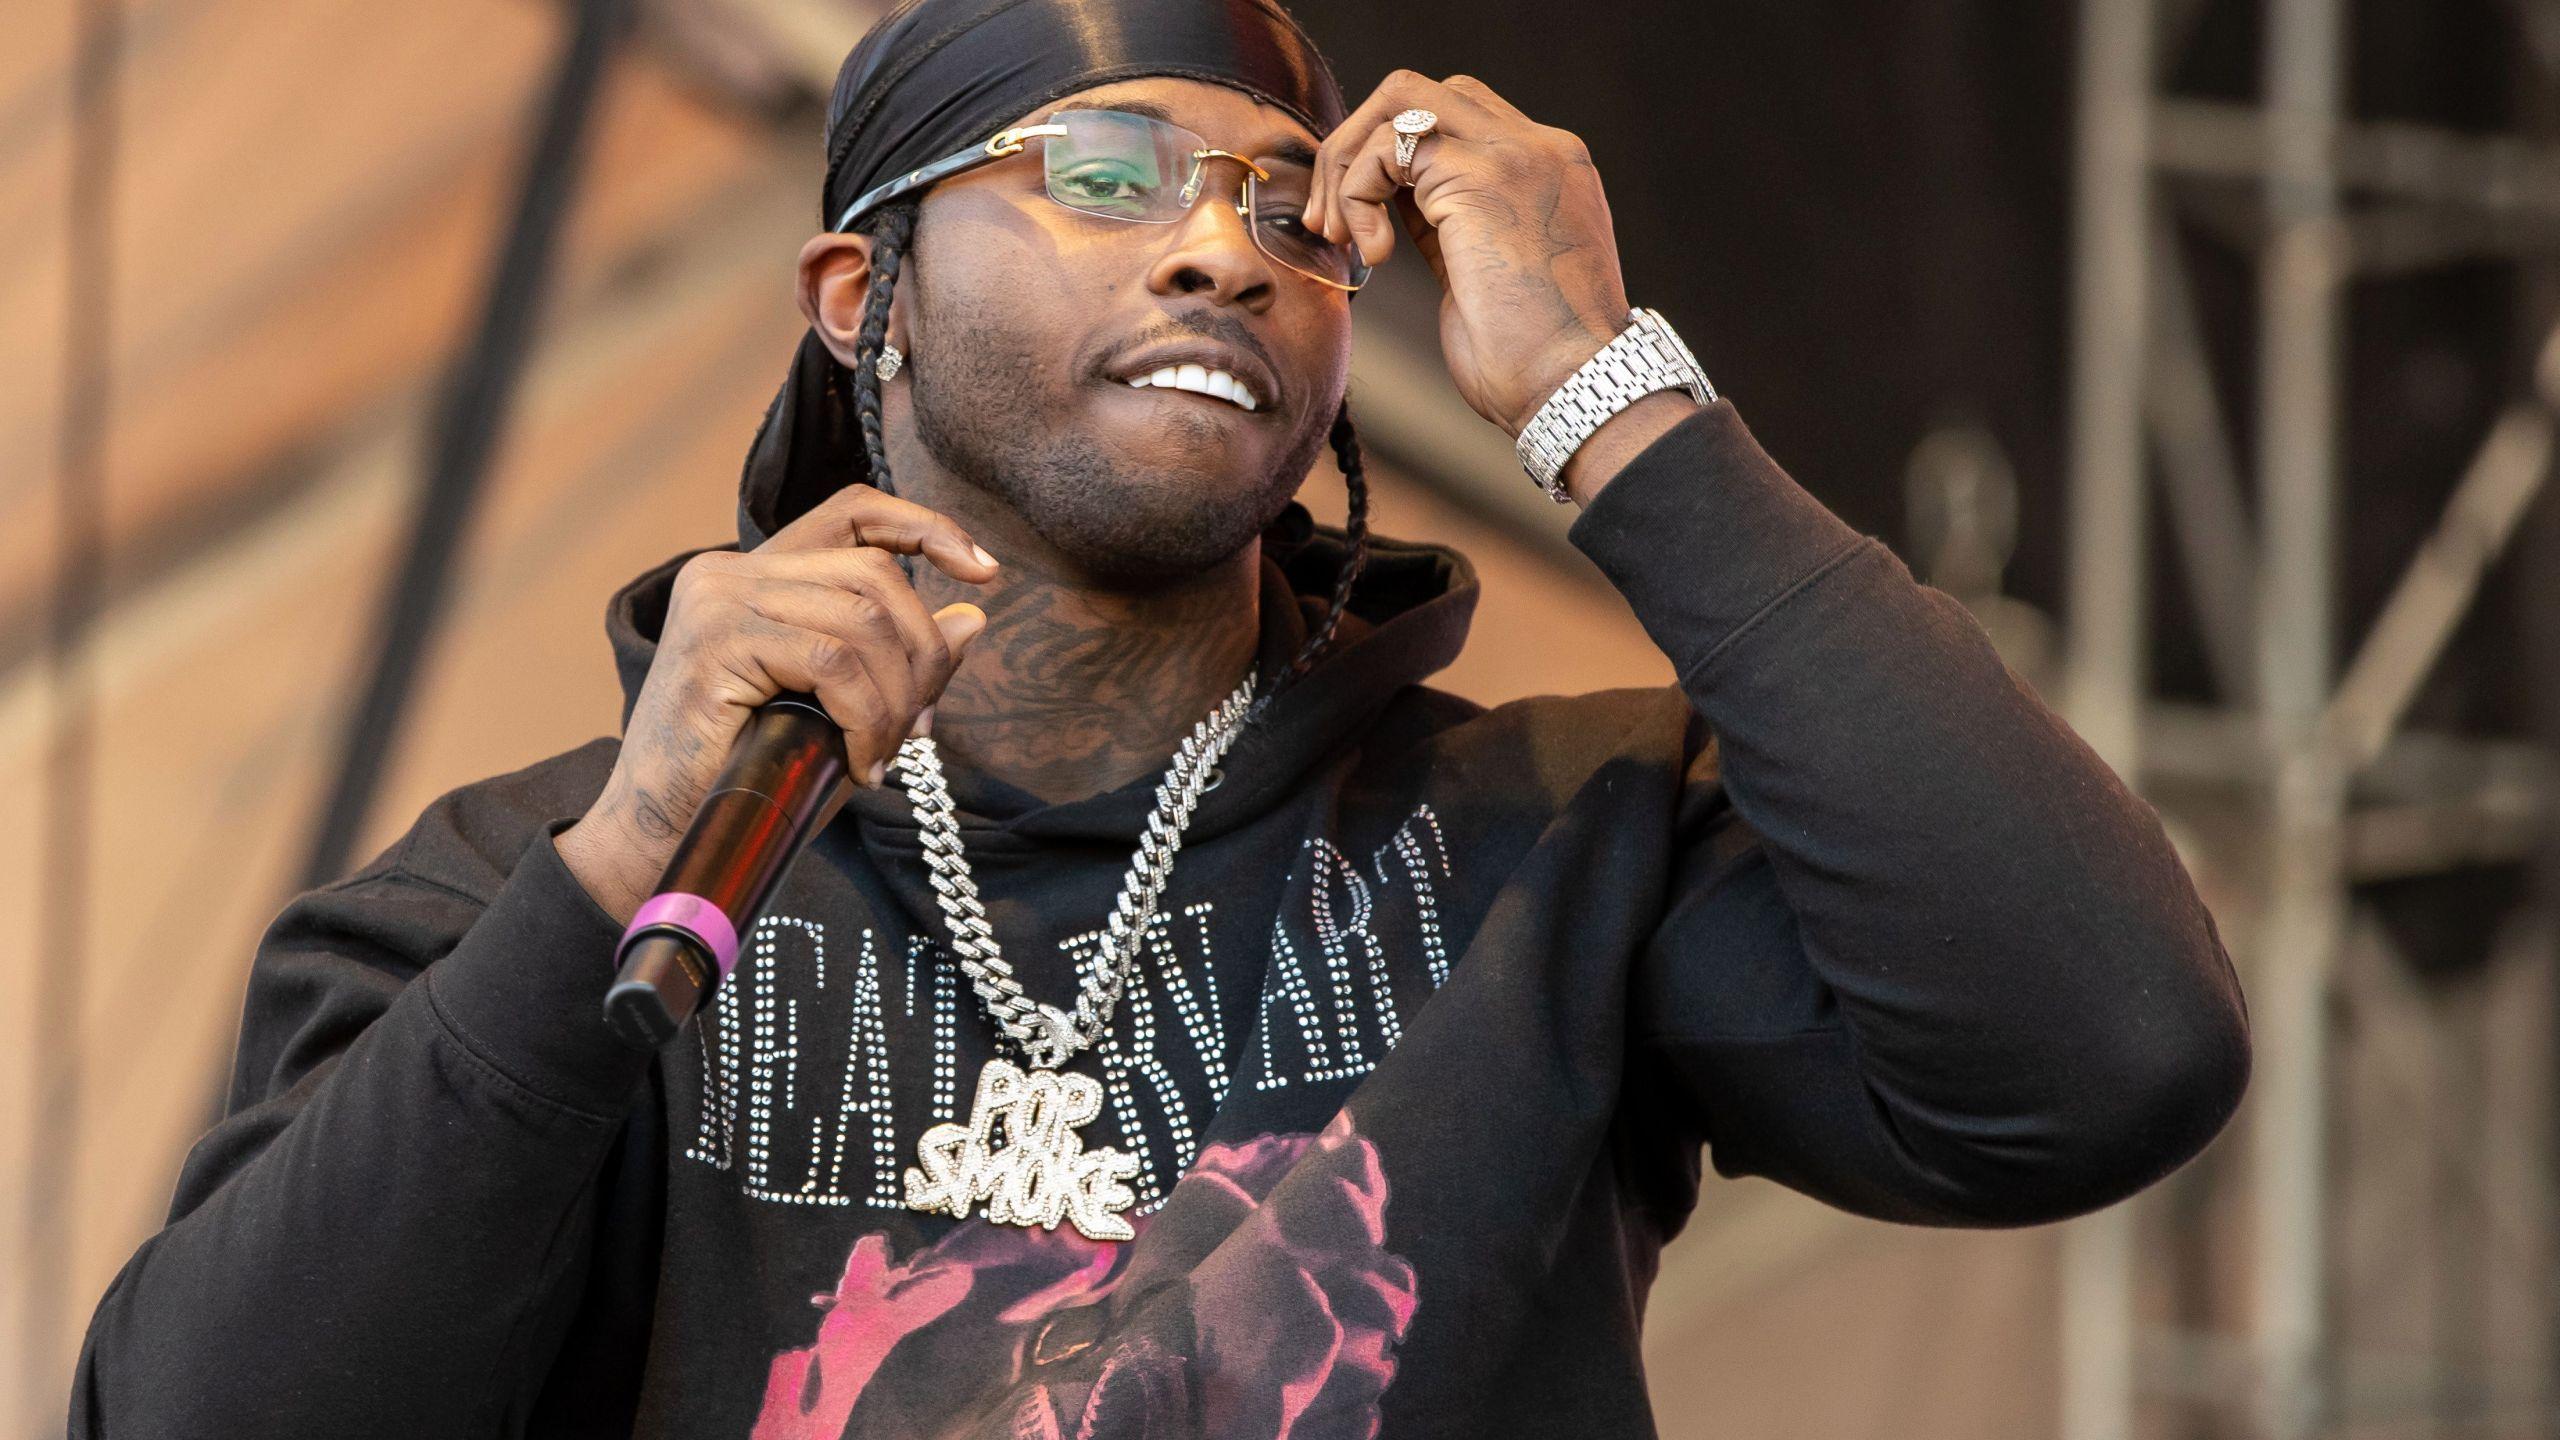 2 Chainz performing at a music festival - Pop Smoke